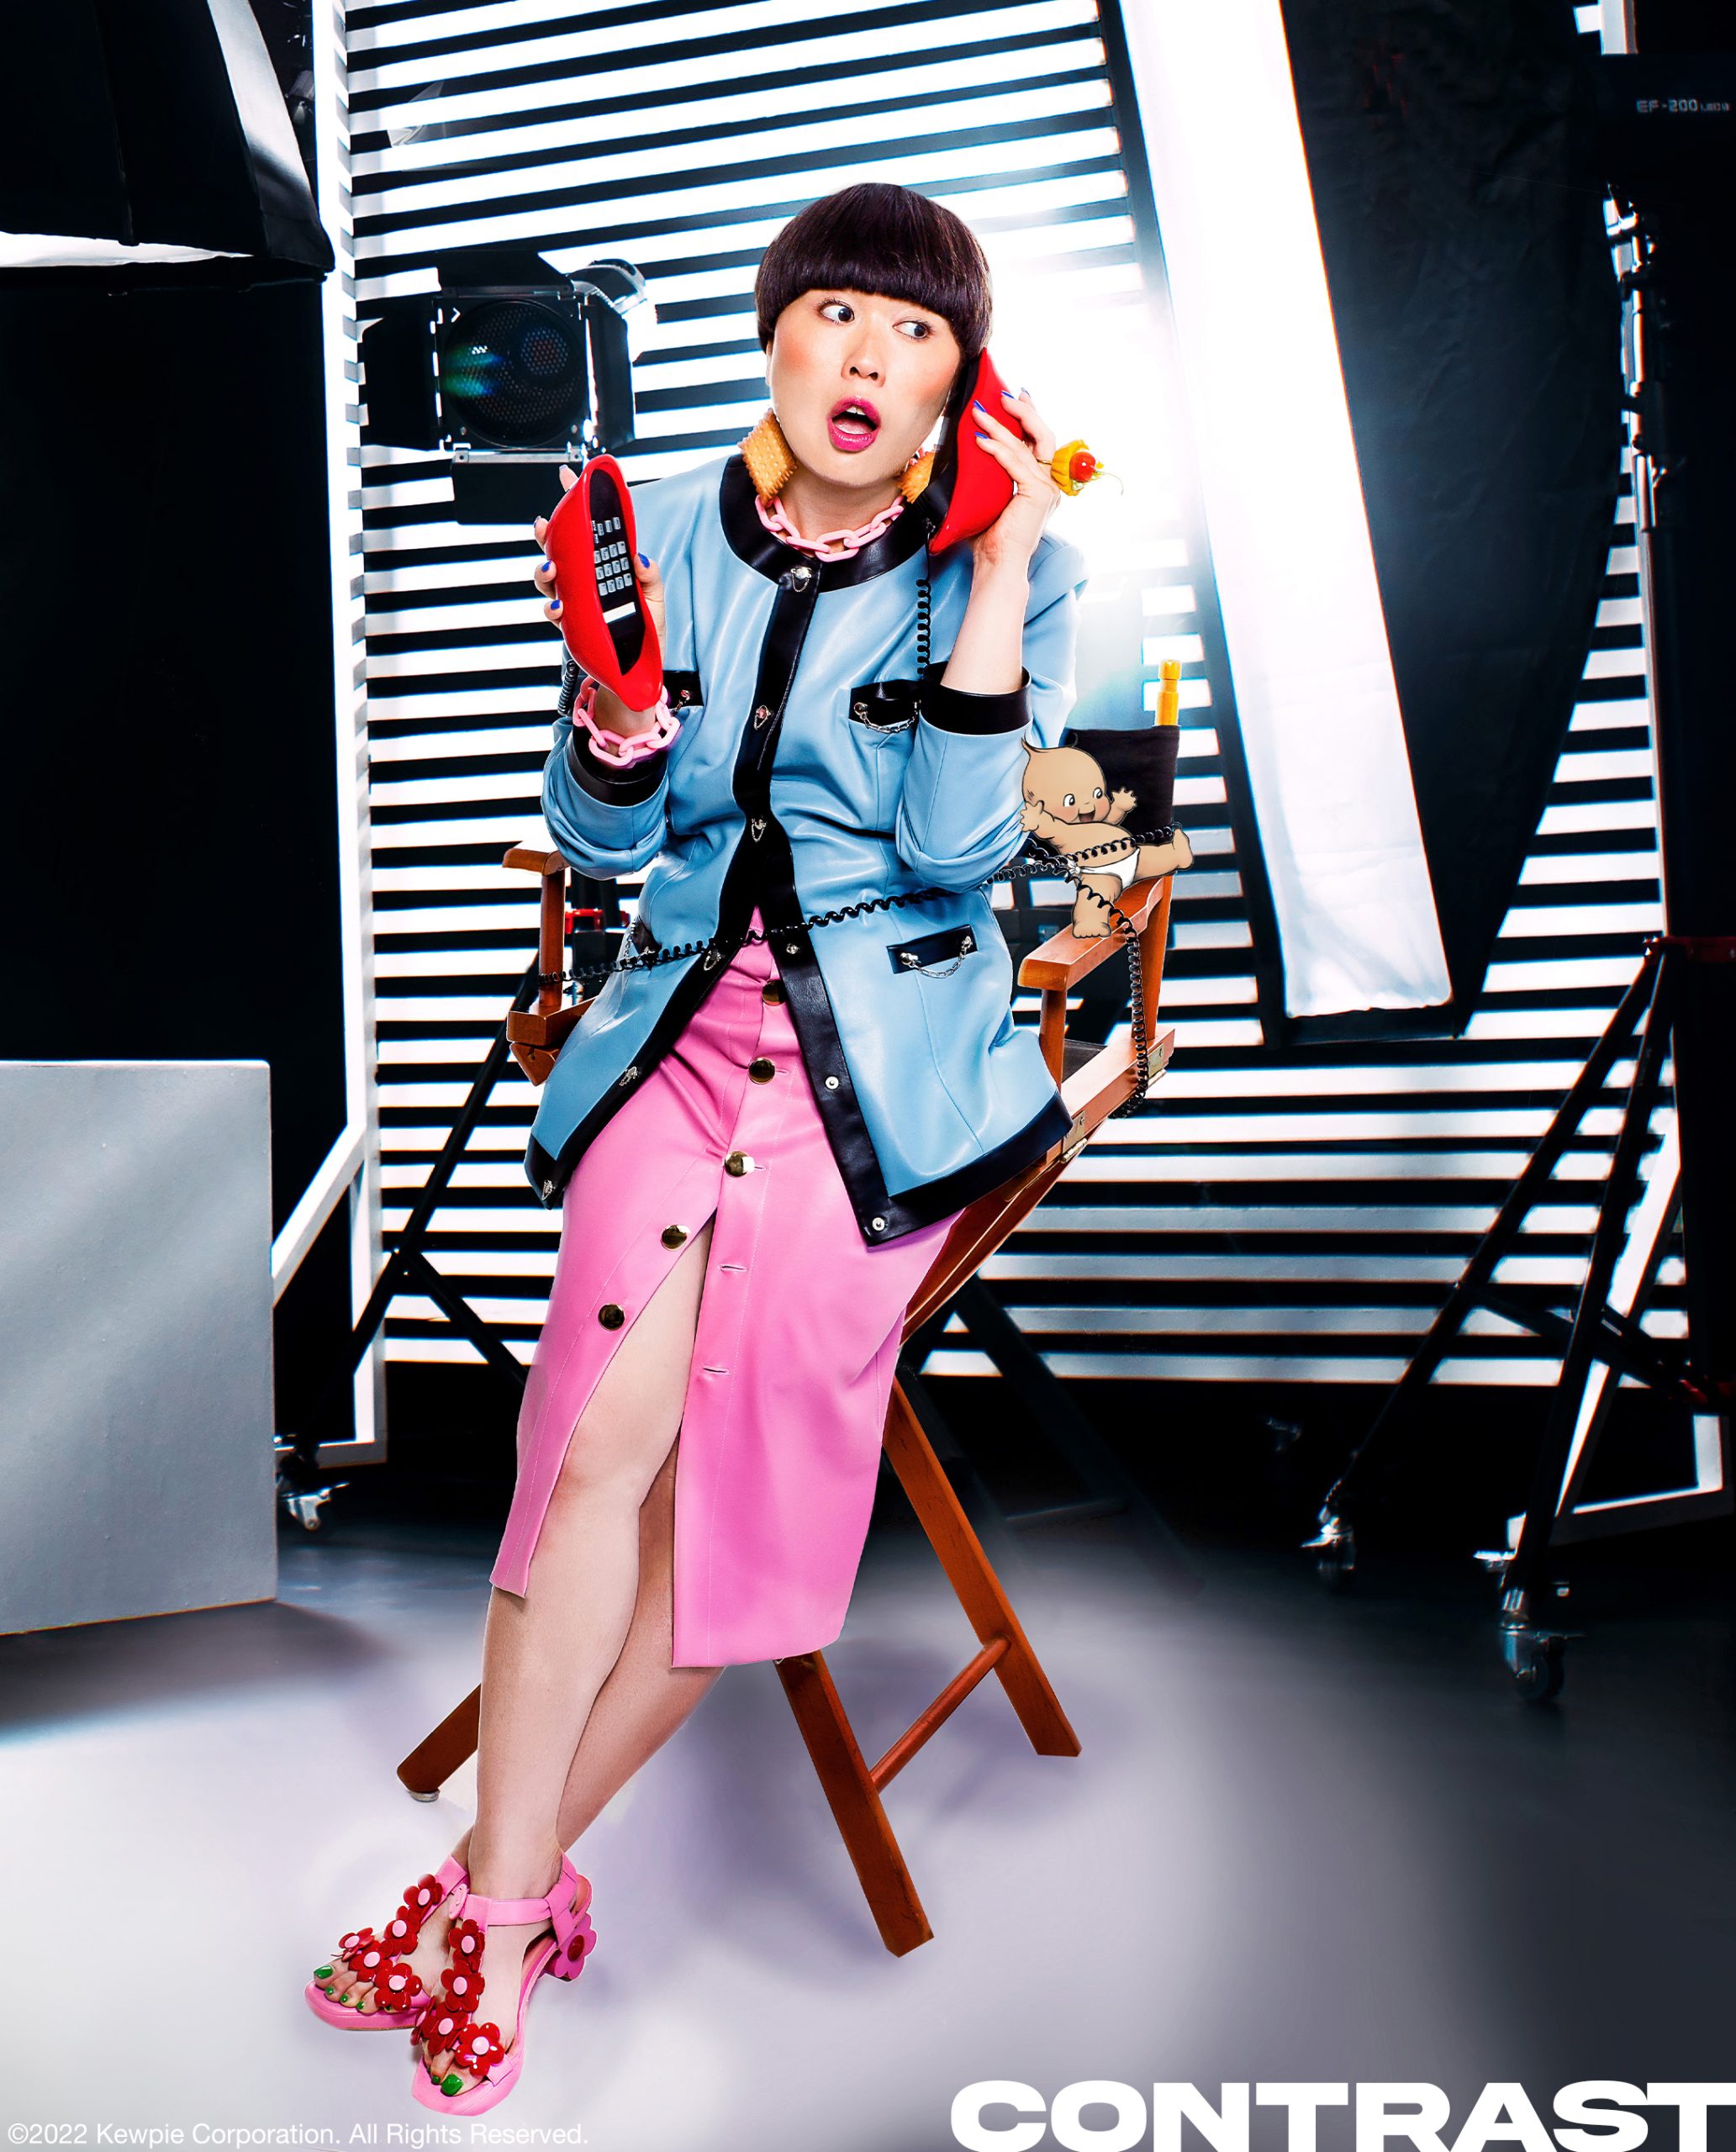 Comedian and HBO MAx star Atsuko Okastuko poses in a director's chair wearing blue blazaer jacket and a pink skirt holding a red lips house phone and surrounded by stage production lights. The image features an illustrated dark tone Kewpie doll character. This editorial was produced by ONCH, formerly known as Onch Movement.